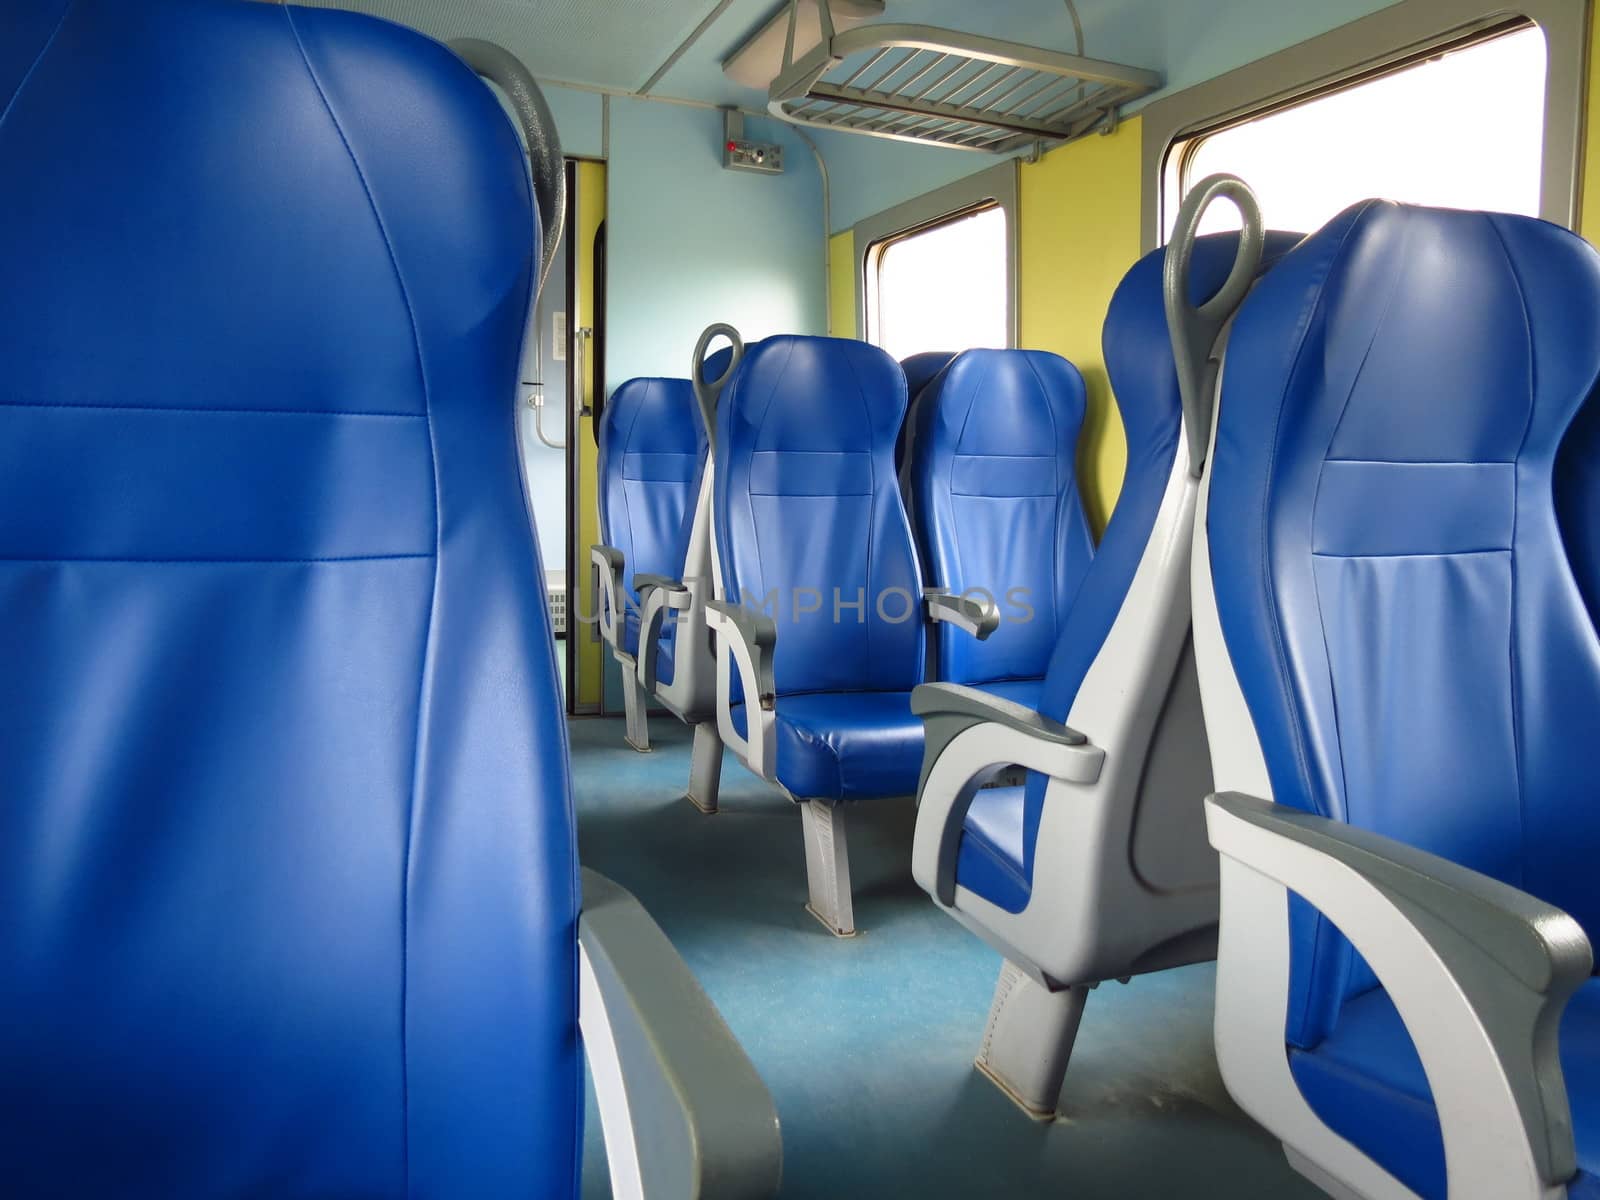 train seats empty useful as travel concept